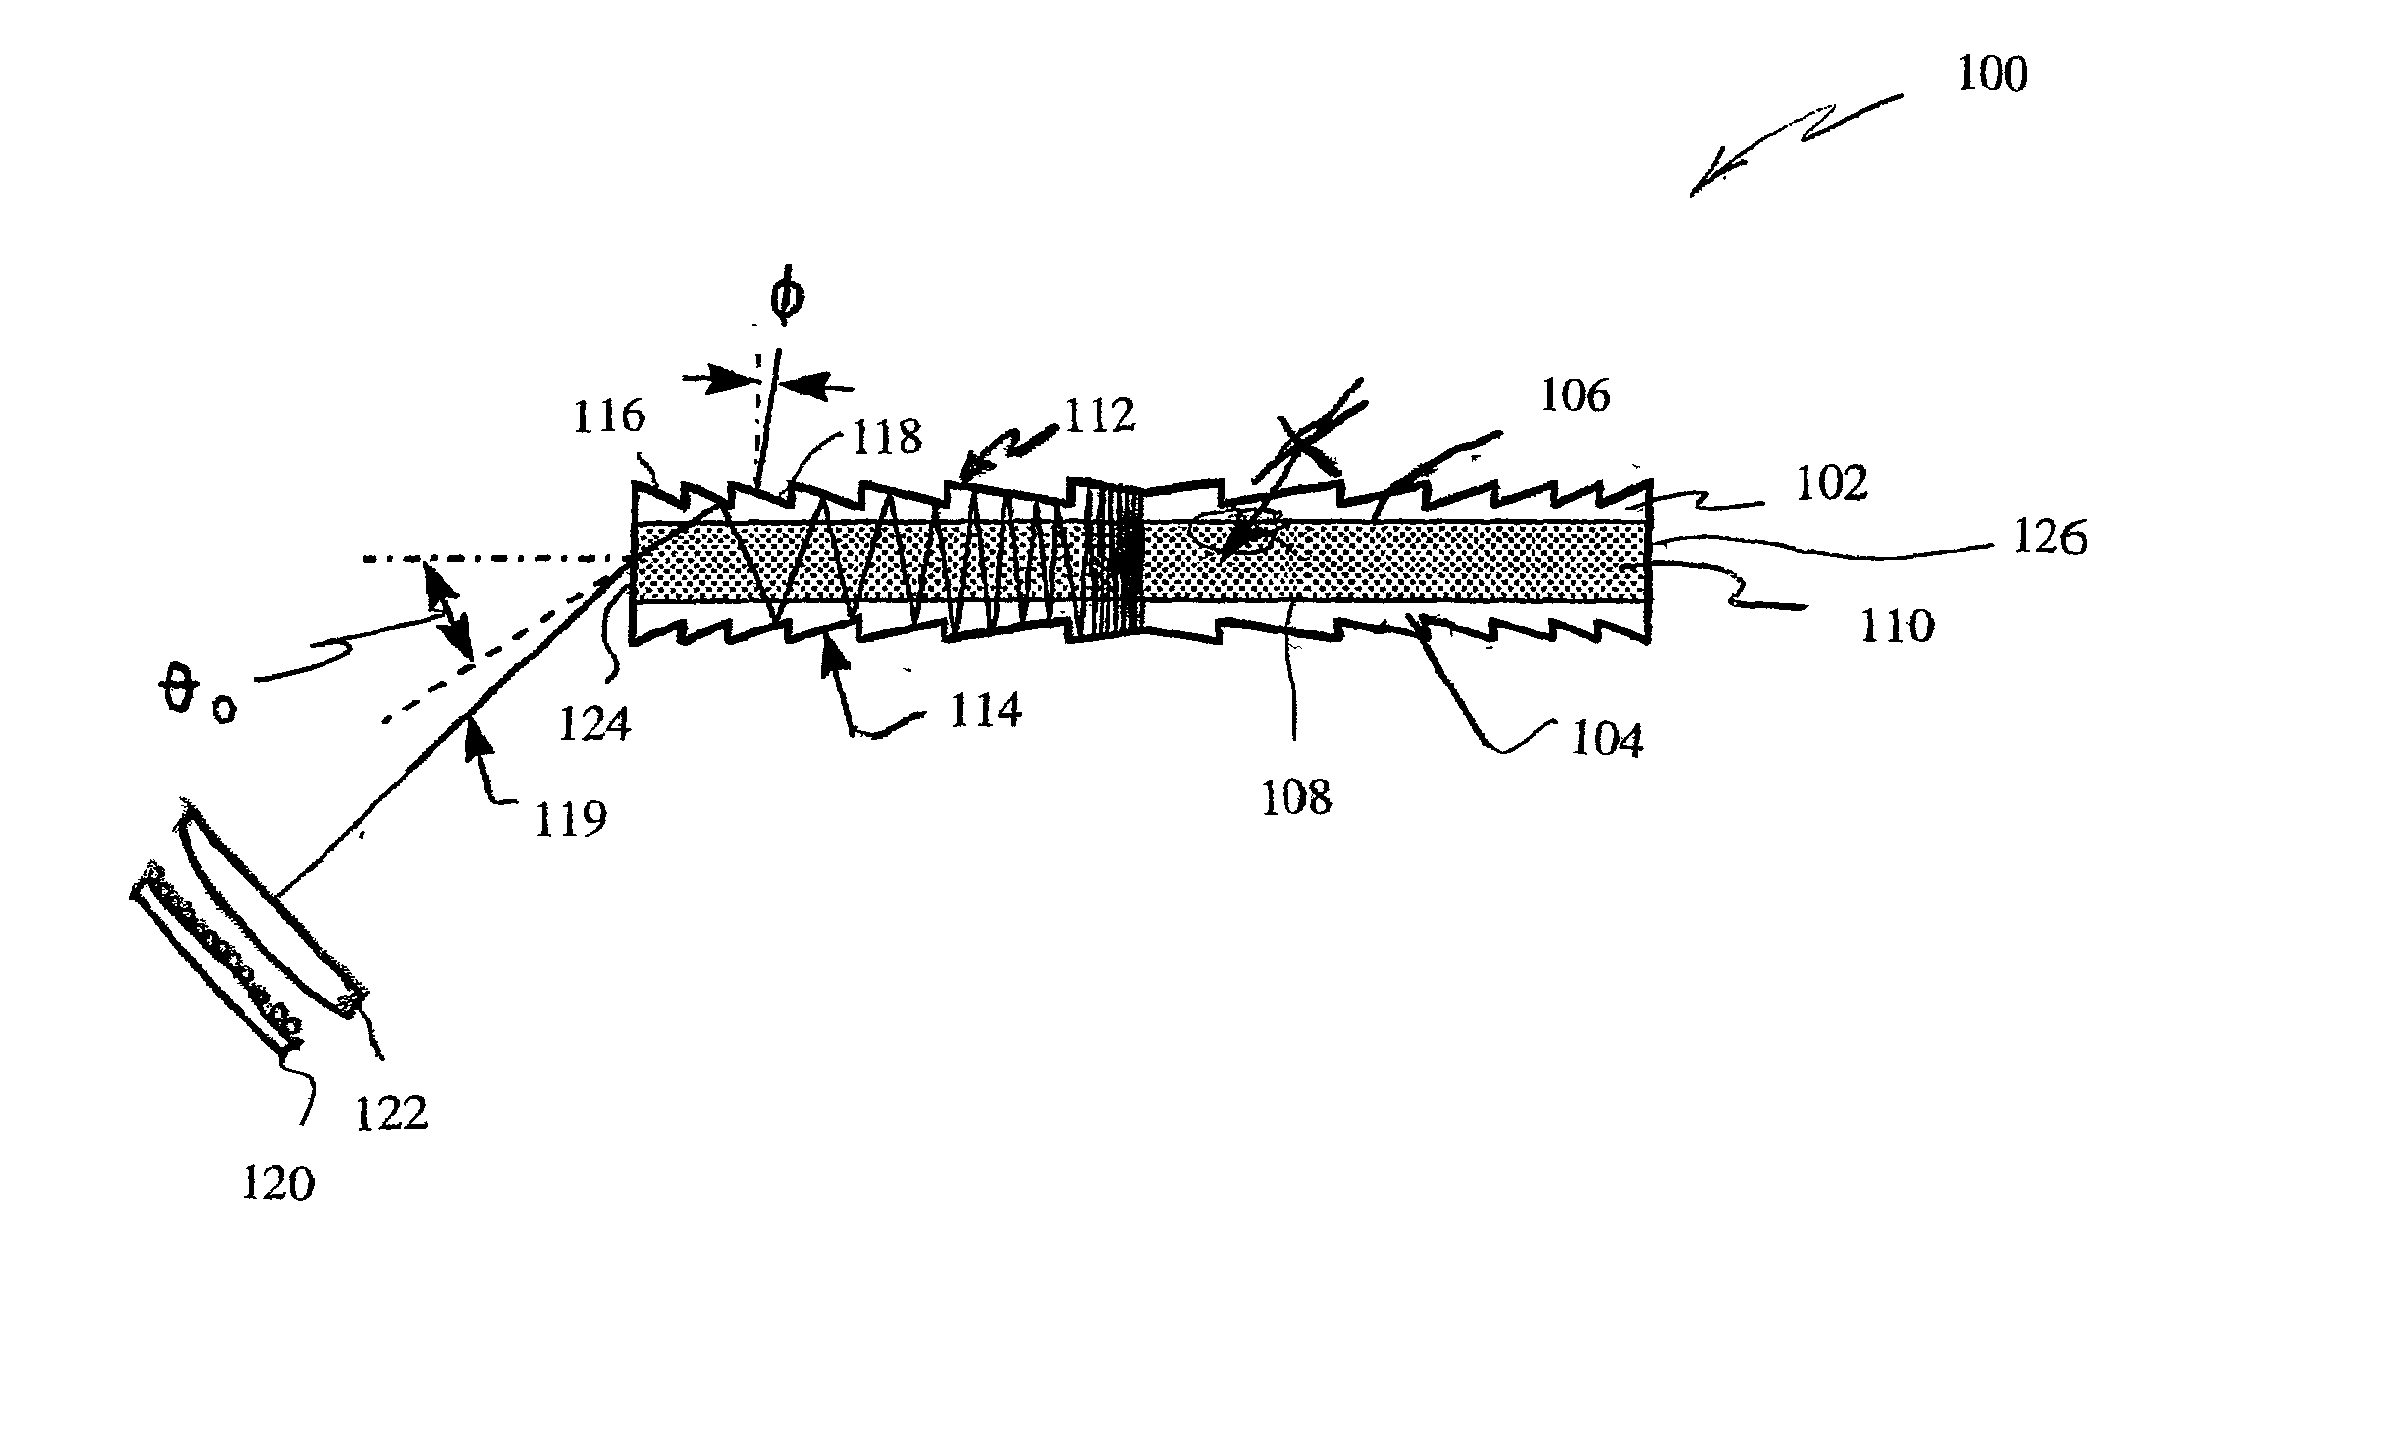 System and method for pumping a slab laser